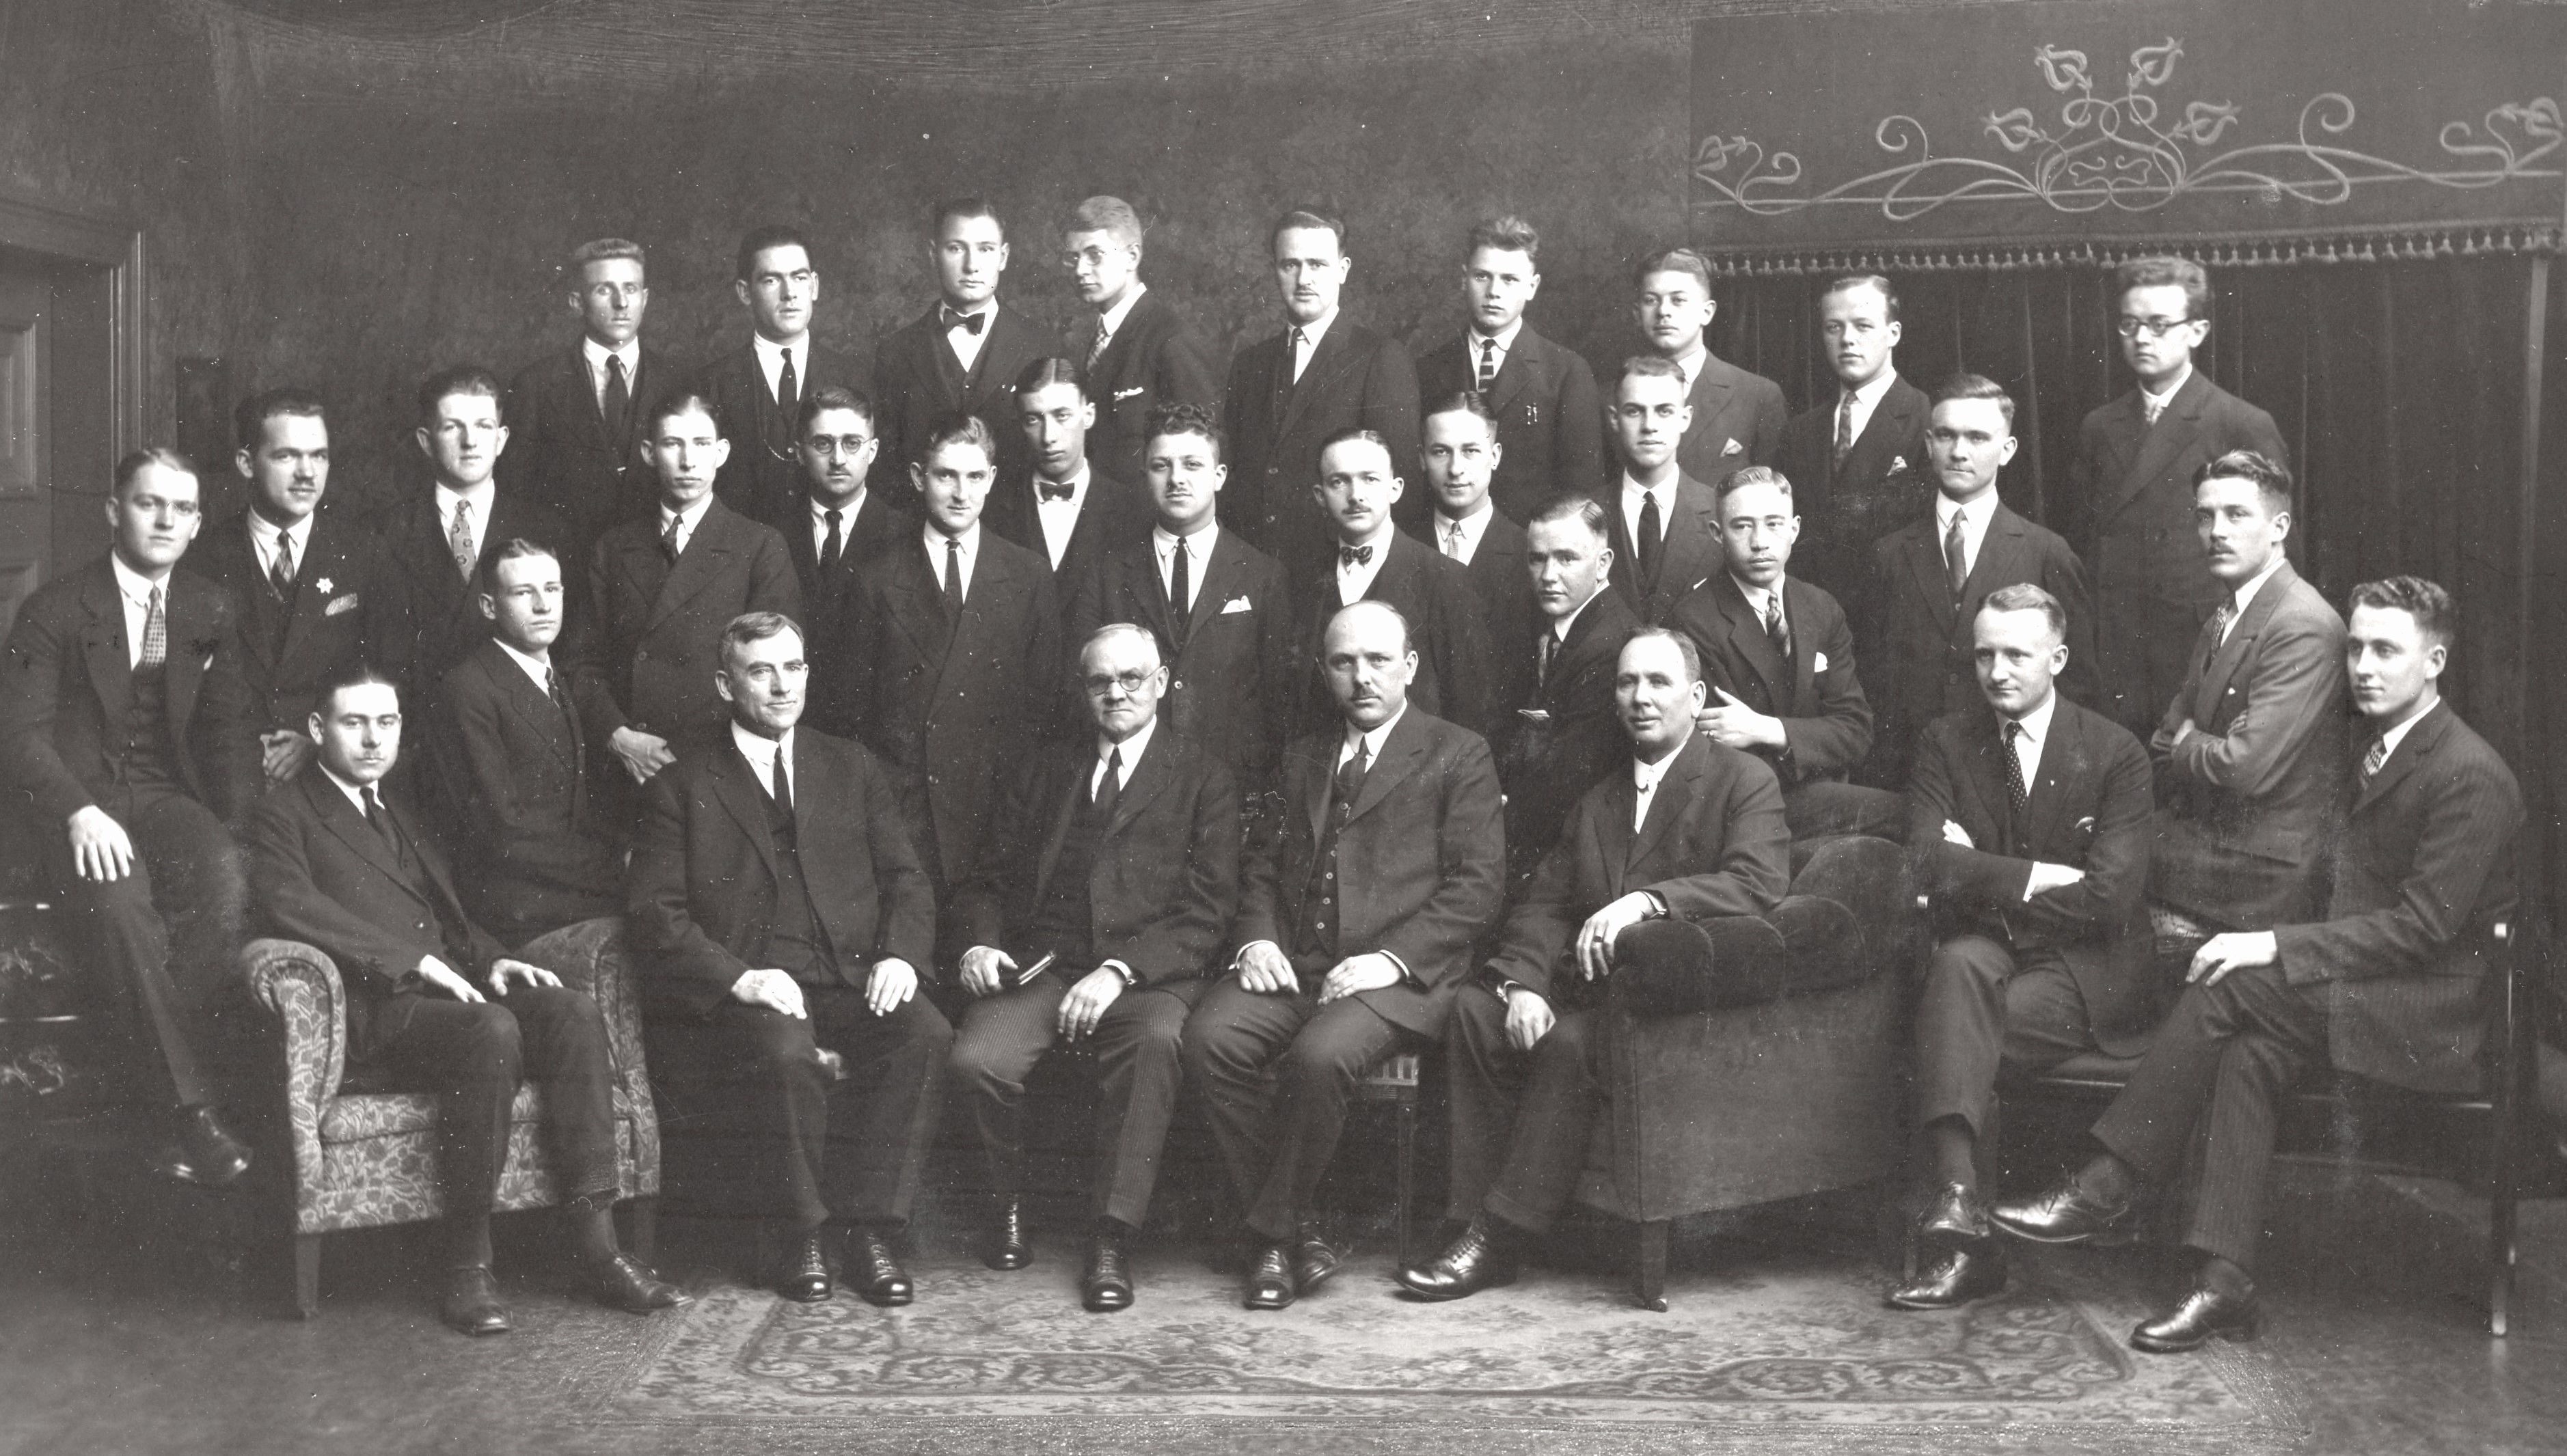 Mission Conference in Hannover, Between 1926 November 13 – 16